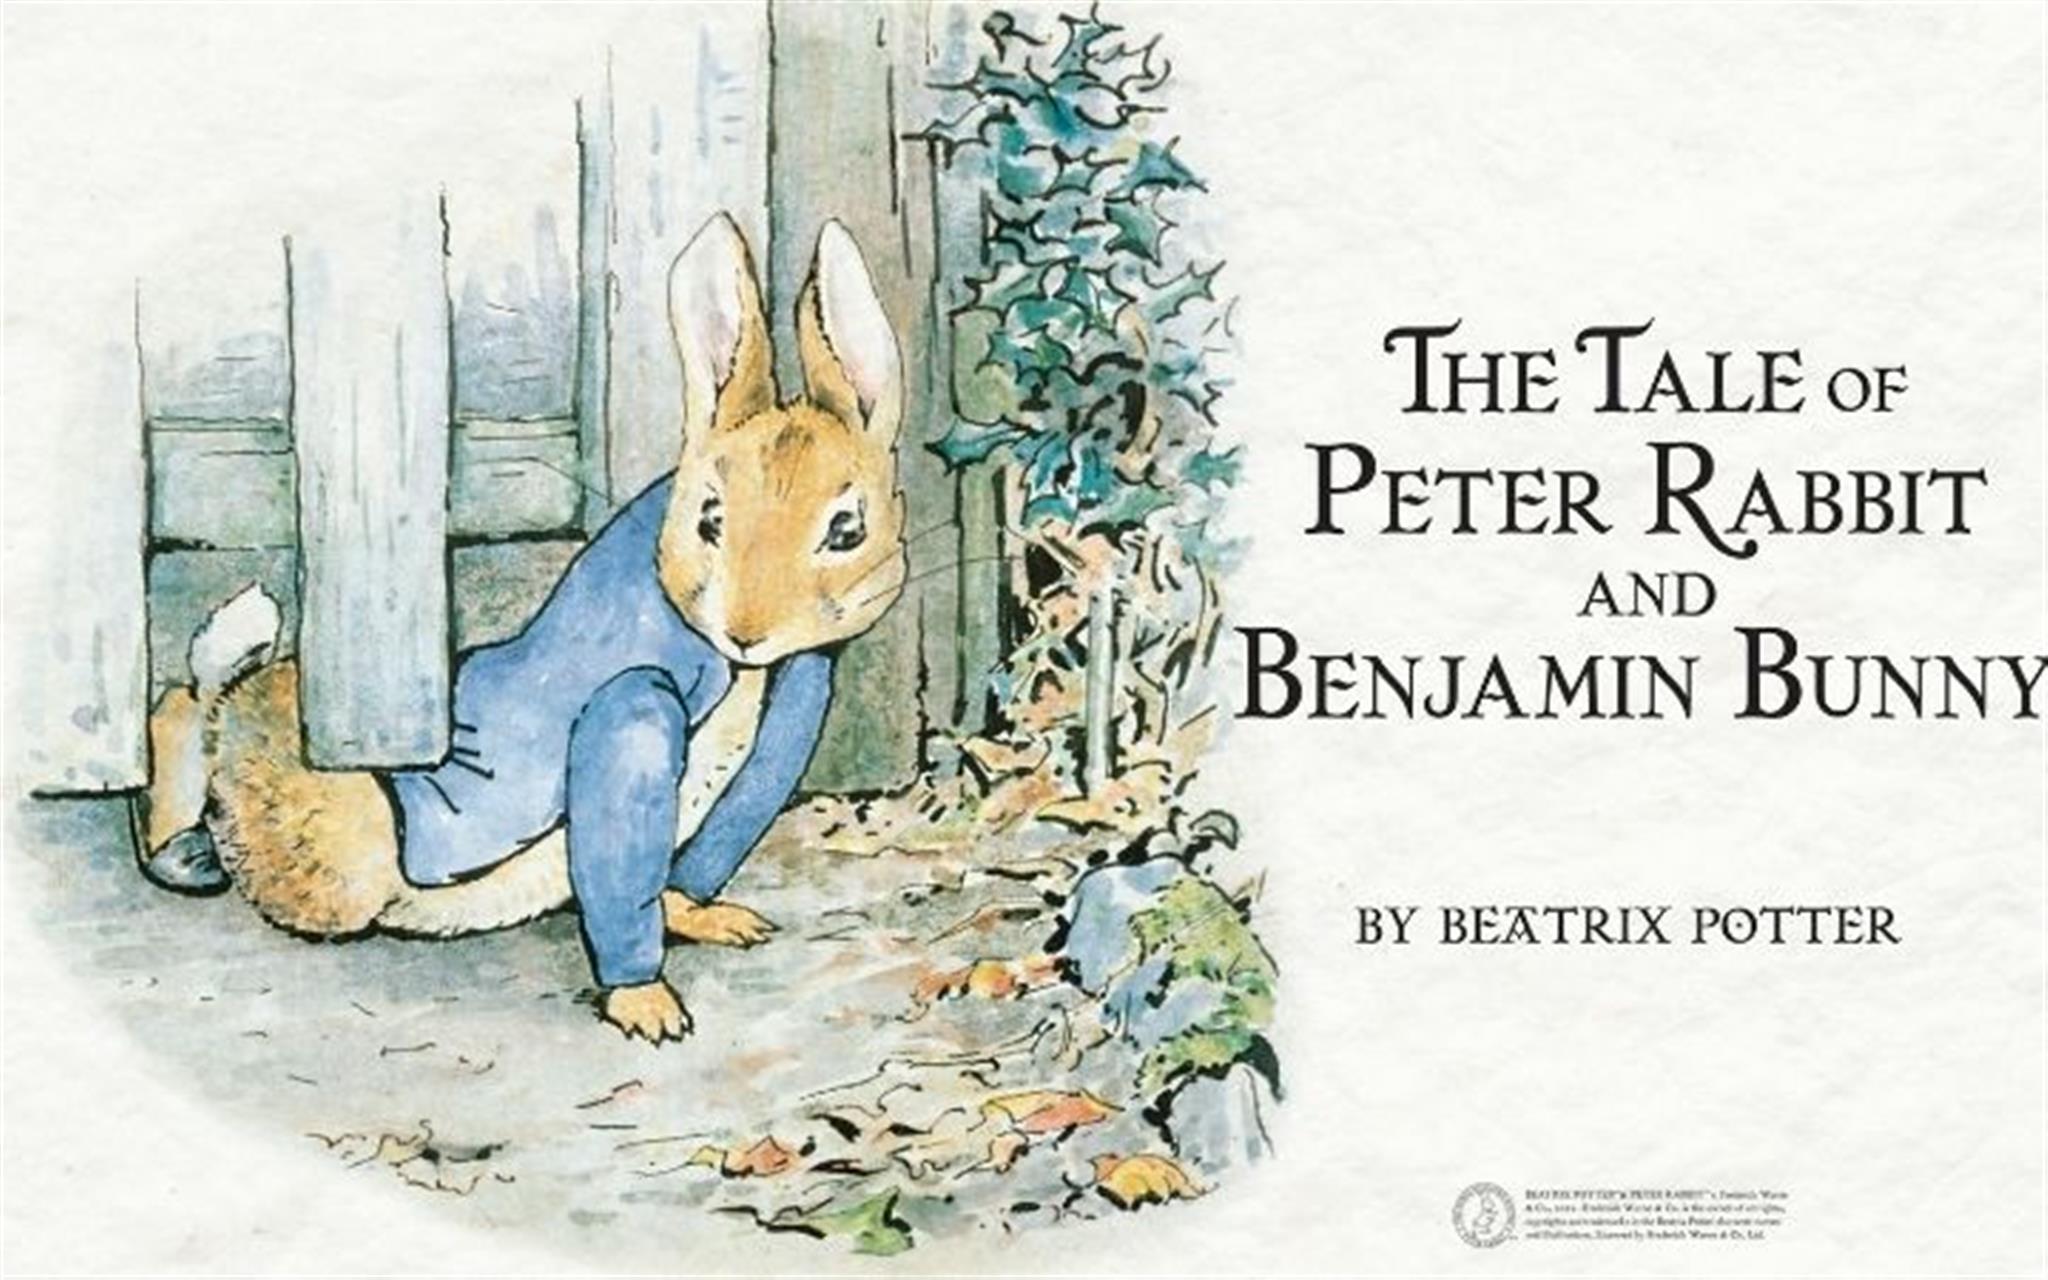 Theatre in the Parks  – The Tale of Peter Rabbit and Benjamin Bunny - Abbey Gardens